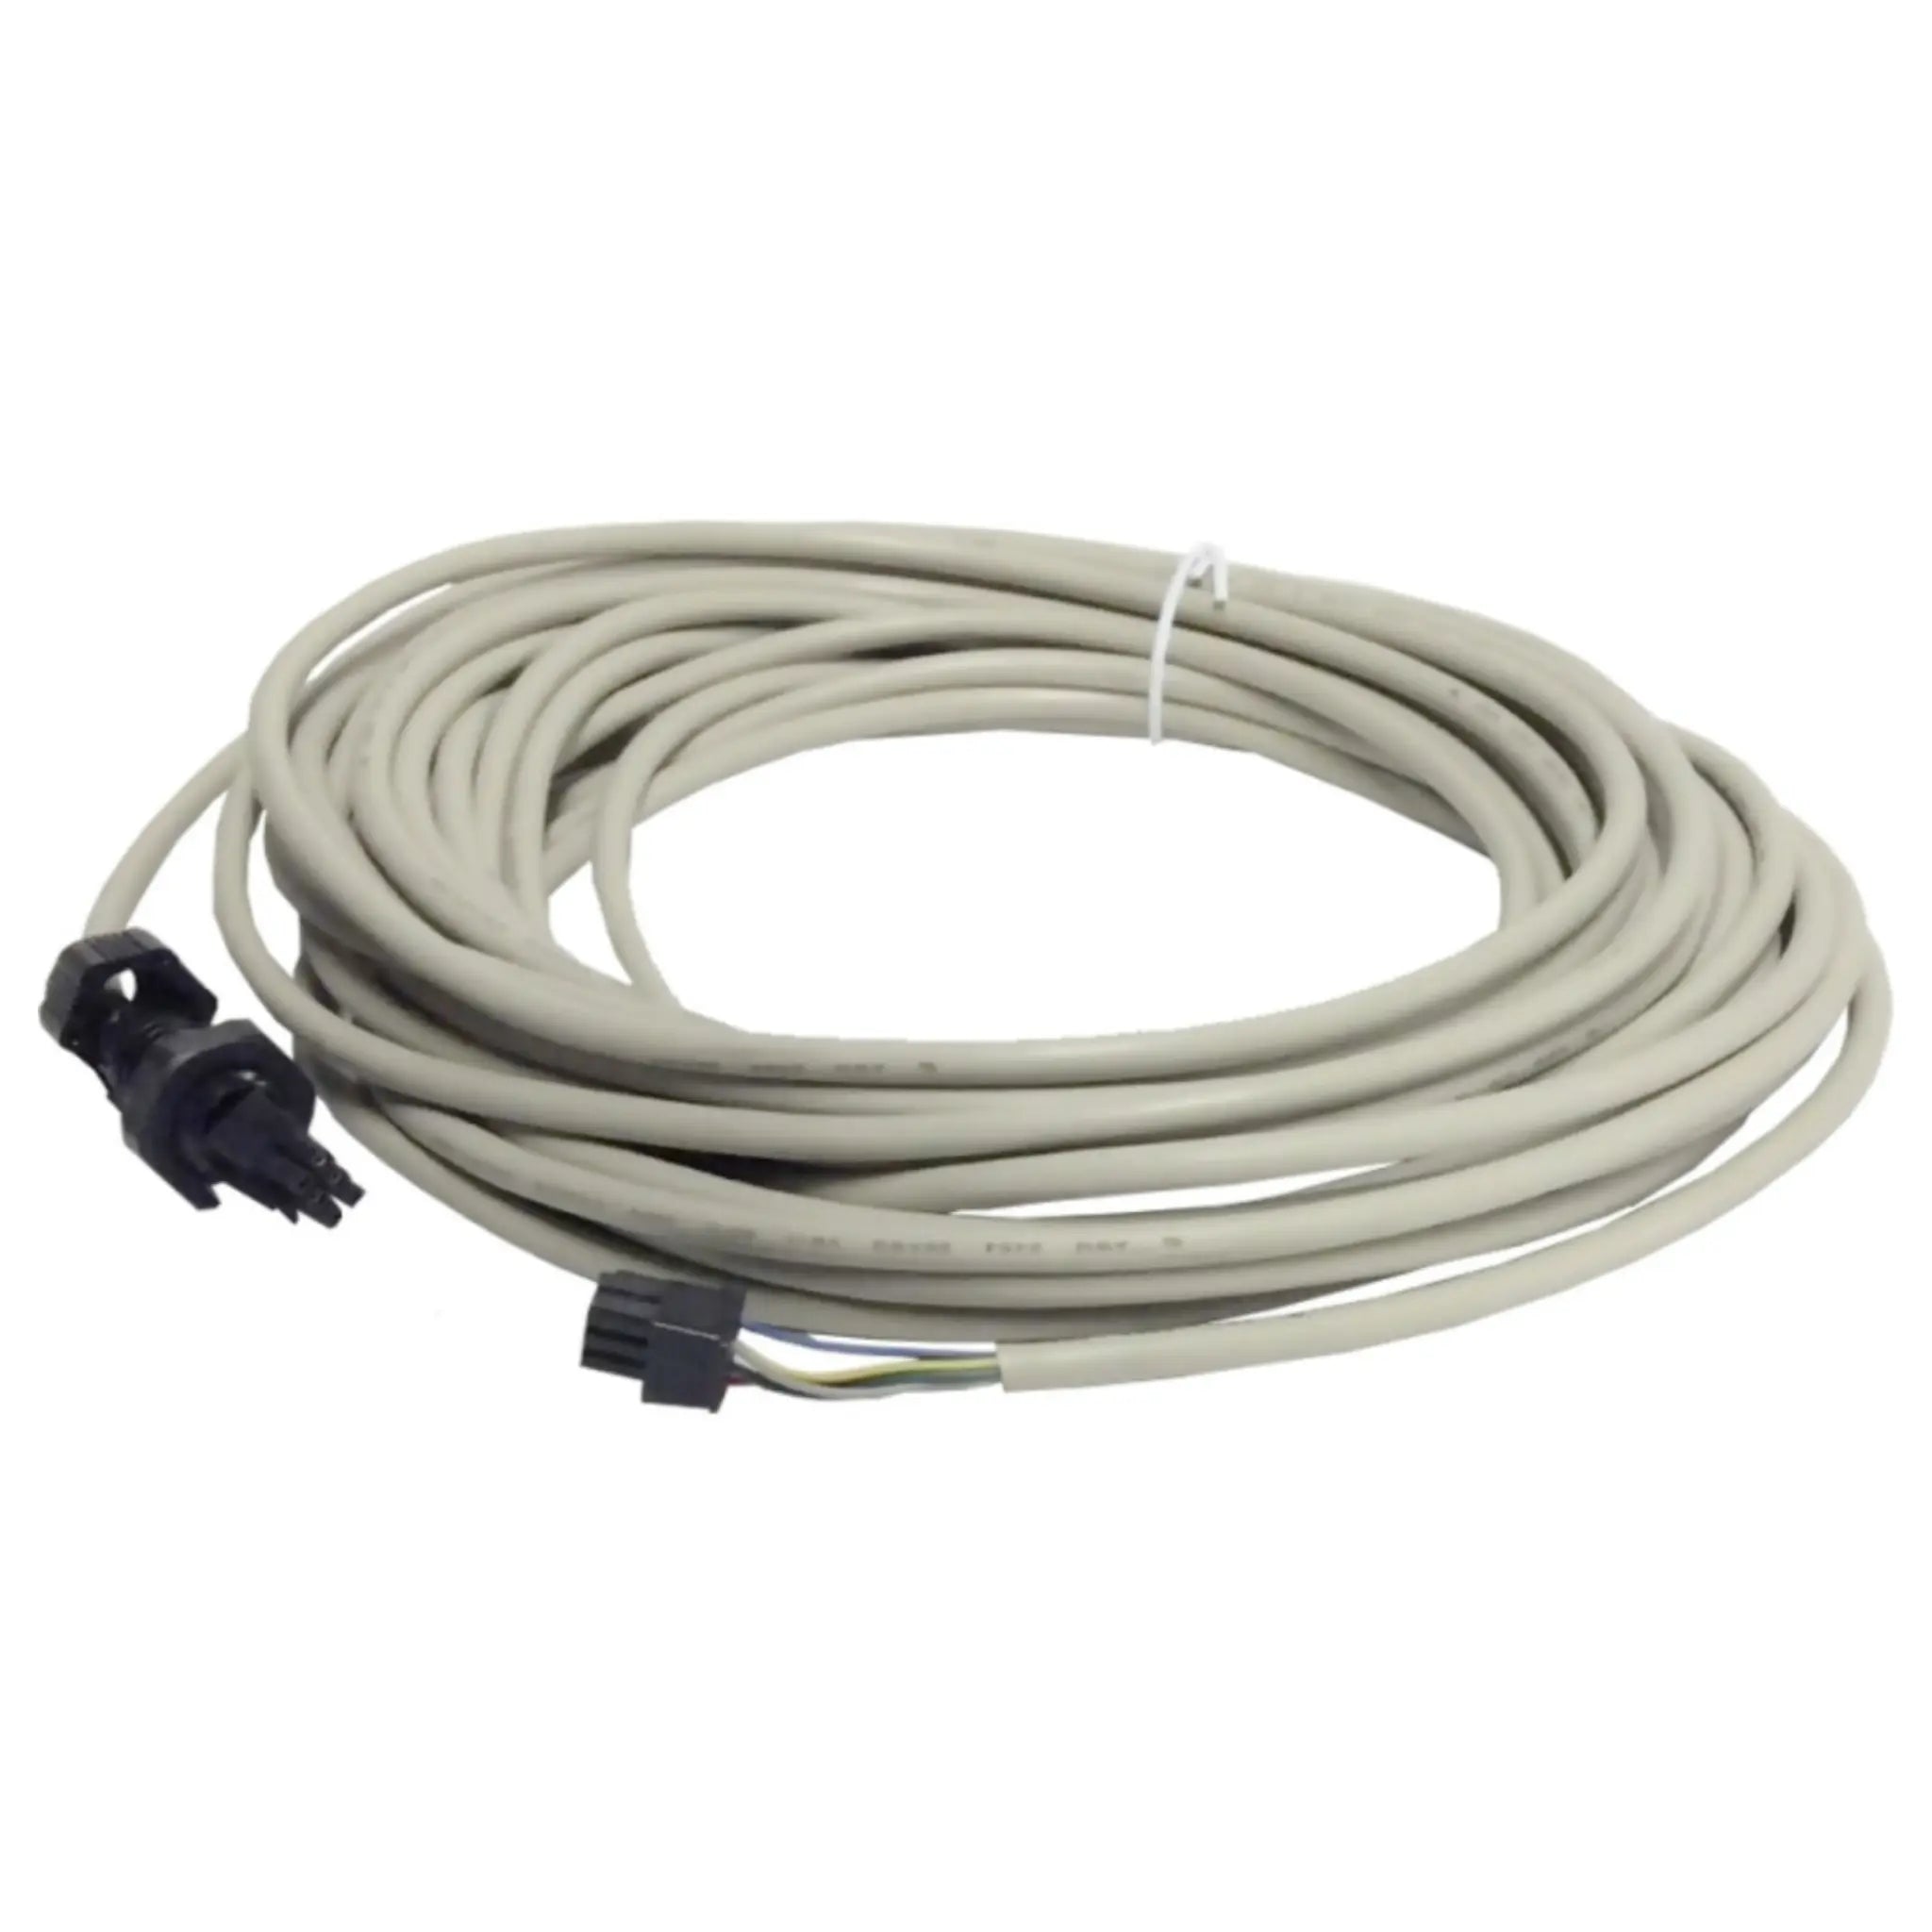 10m cable for control panel 6 pin Grey cable | Finnmark Sauna